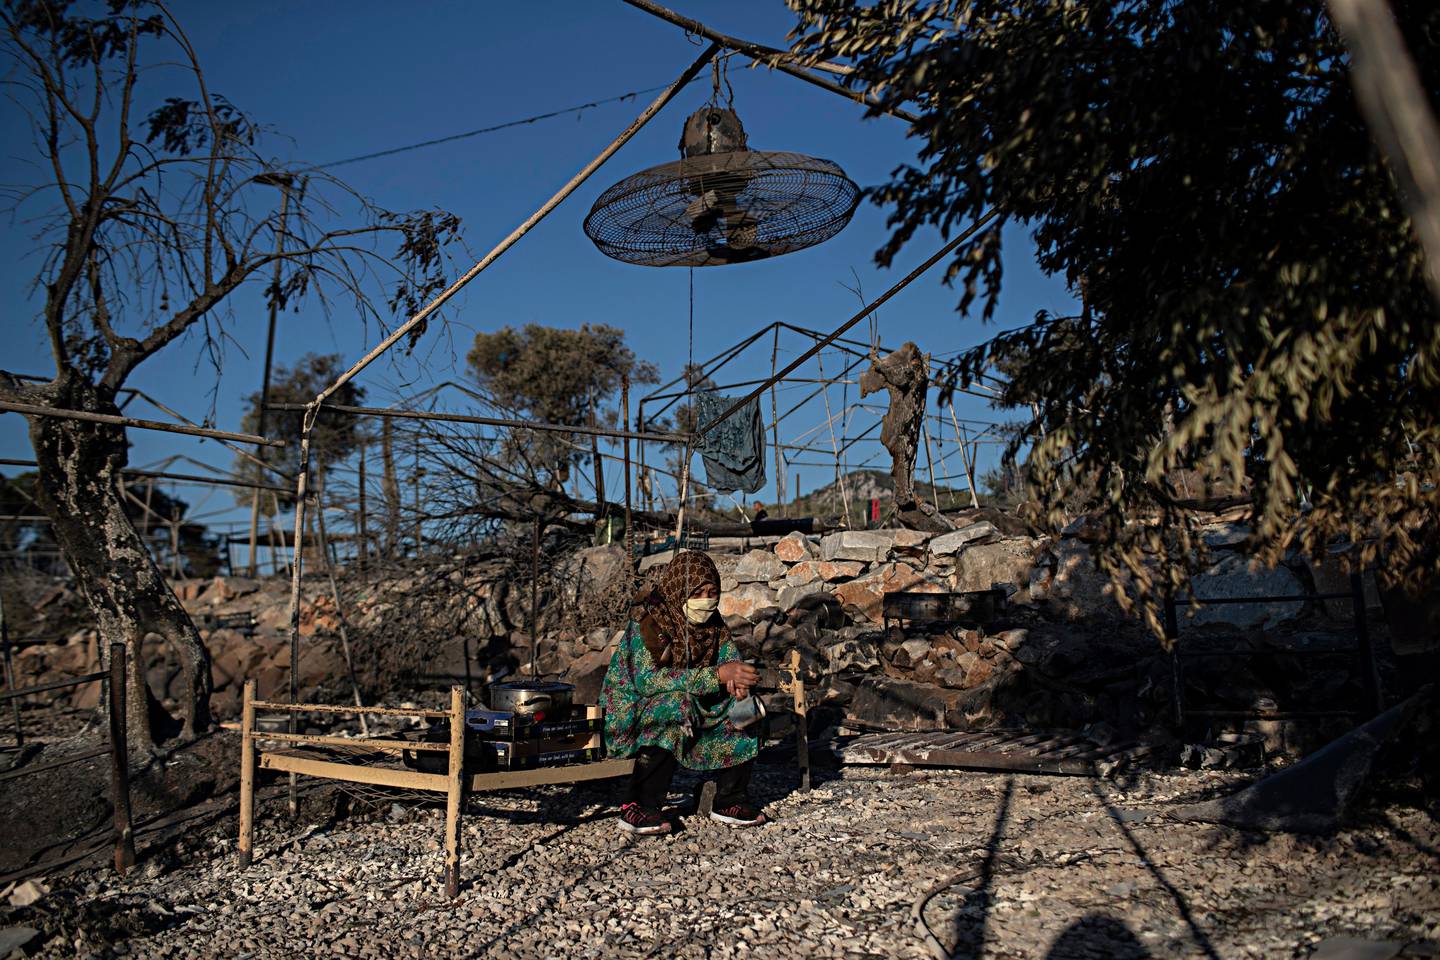 A migrant woman sits on a burned bed in the Moria refugee camp on the northeastern island of Lesbos, Greece, Thursday, Sept. 10, 2020. A second fire in Greece's notoriously overcrowded Moria refugee camp destroyed nearly everything that had been spared in the original blaze, Greece's migration ministry said Thursday, leaving thousands more people in need of emergency housing. (AP Photo/Petros Giannakouris)